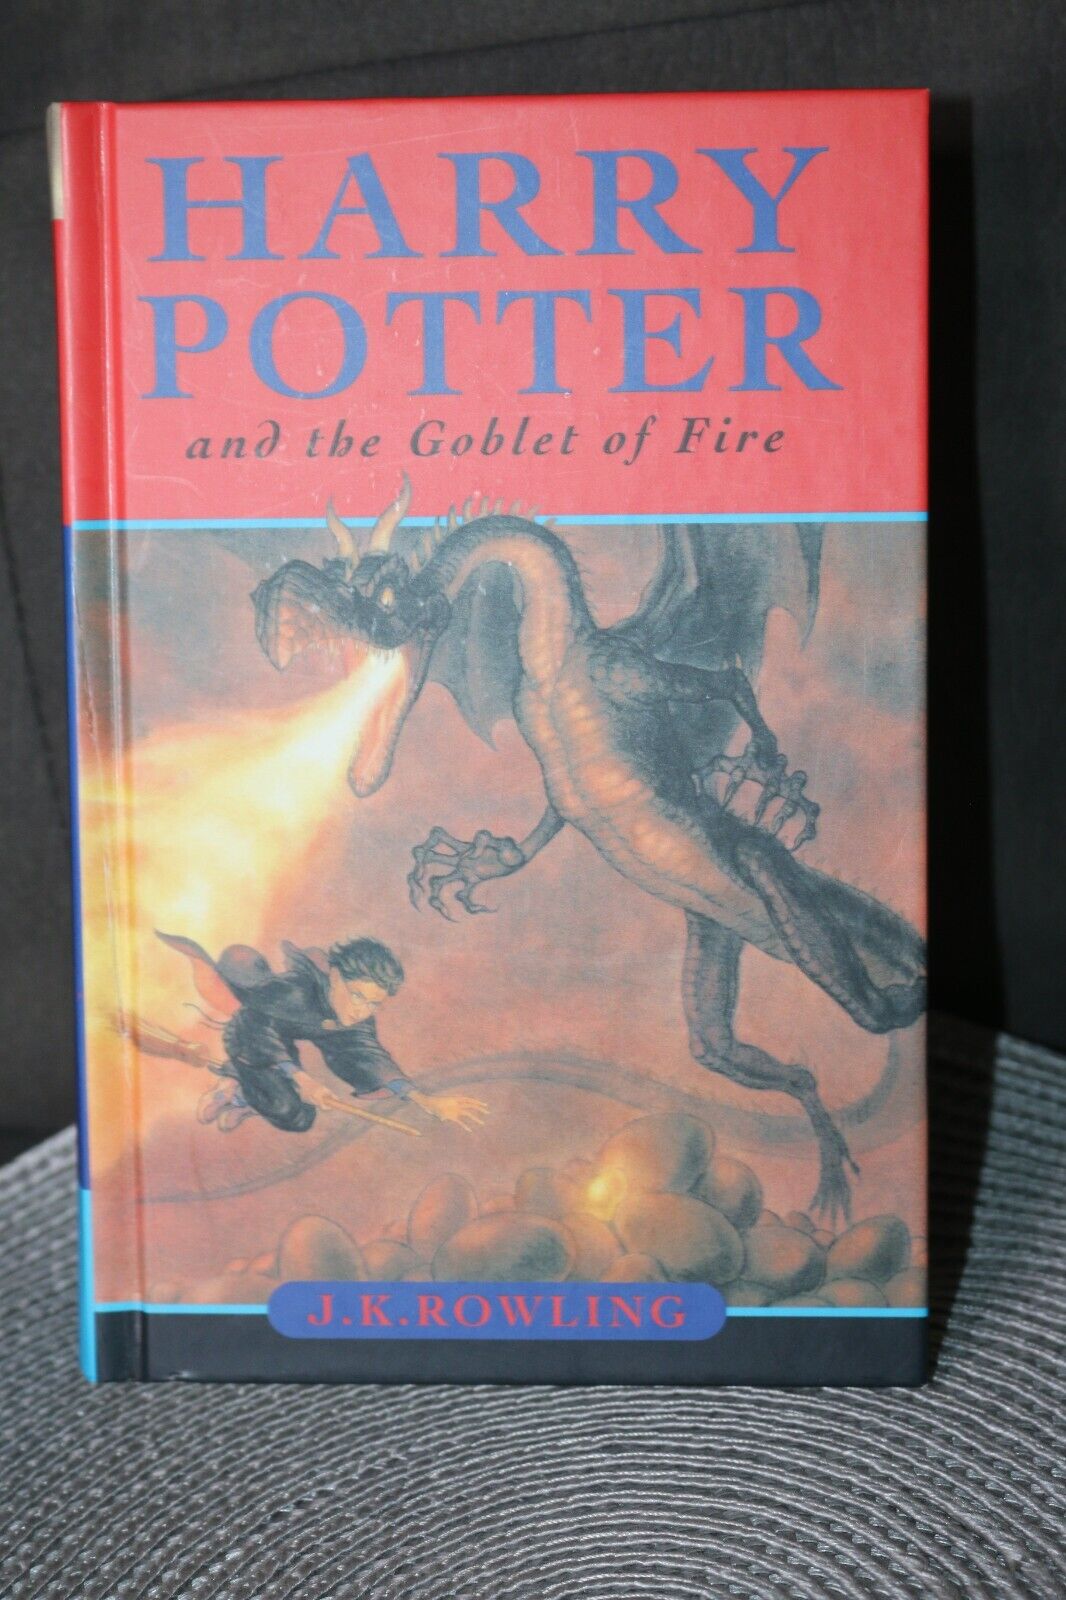 Harry Potter And The Goblet Of Fire By J.K. Rowling First Edition Hardback, 2000